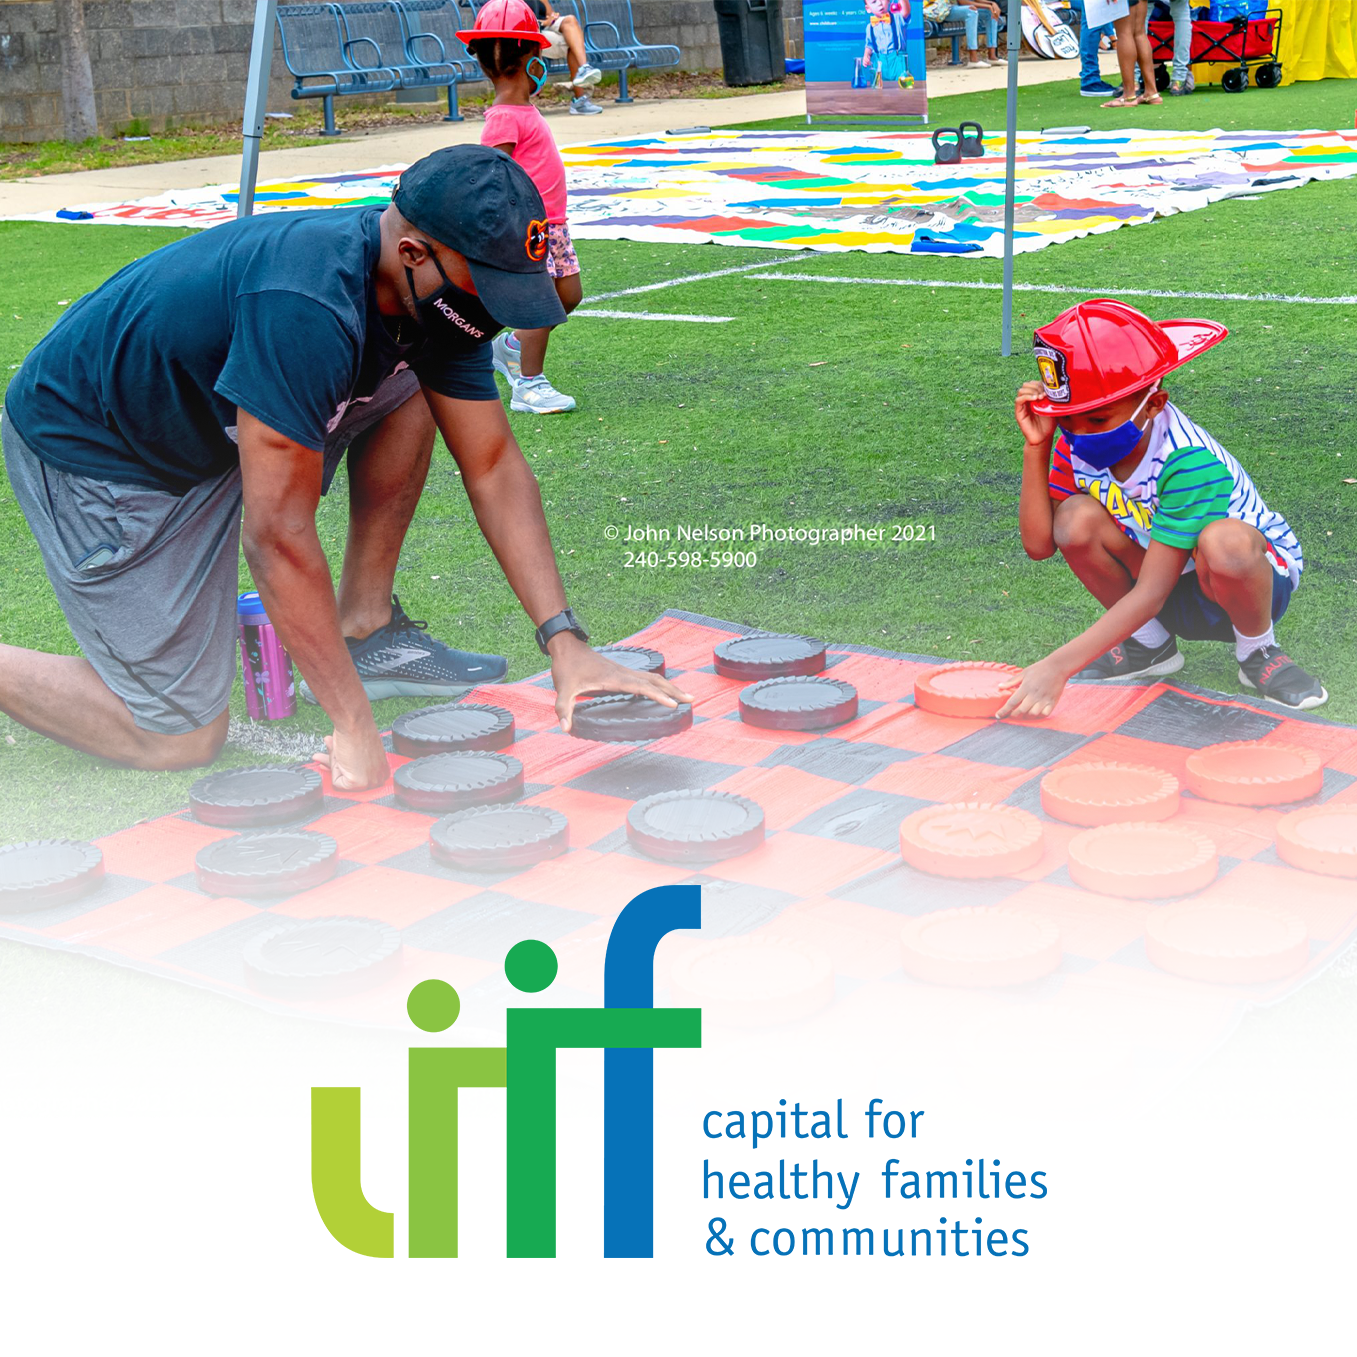 liif Partnership - capital for healthy families & communities